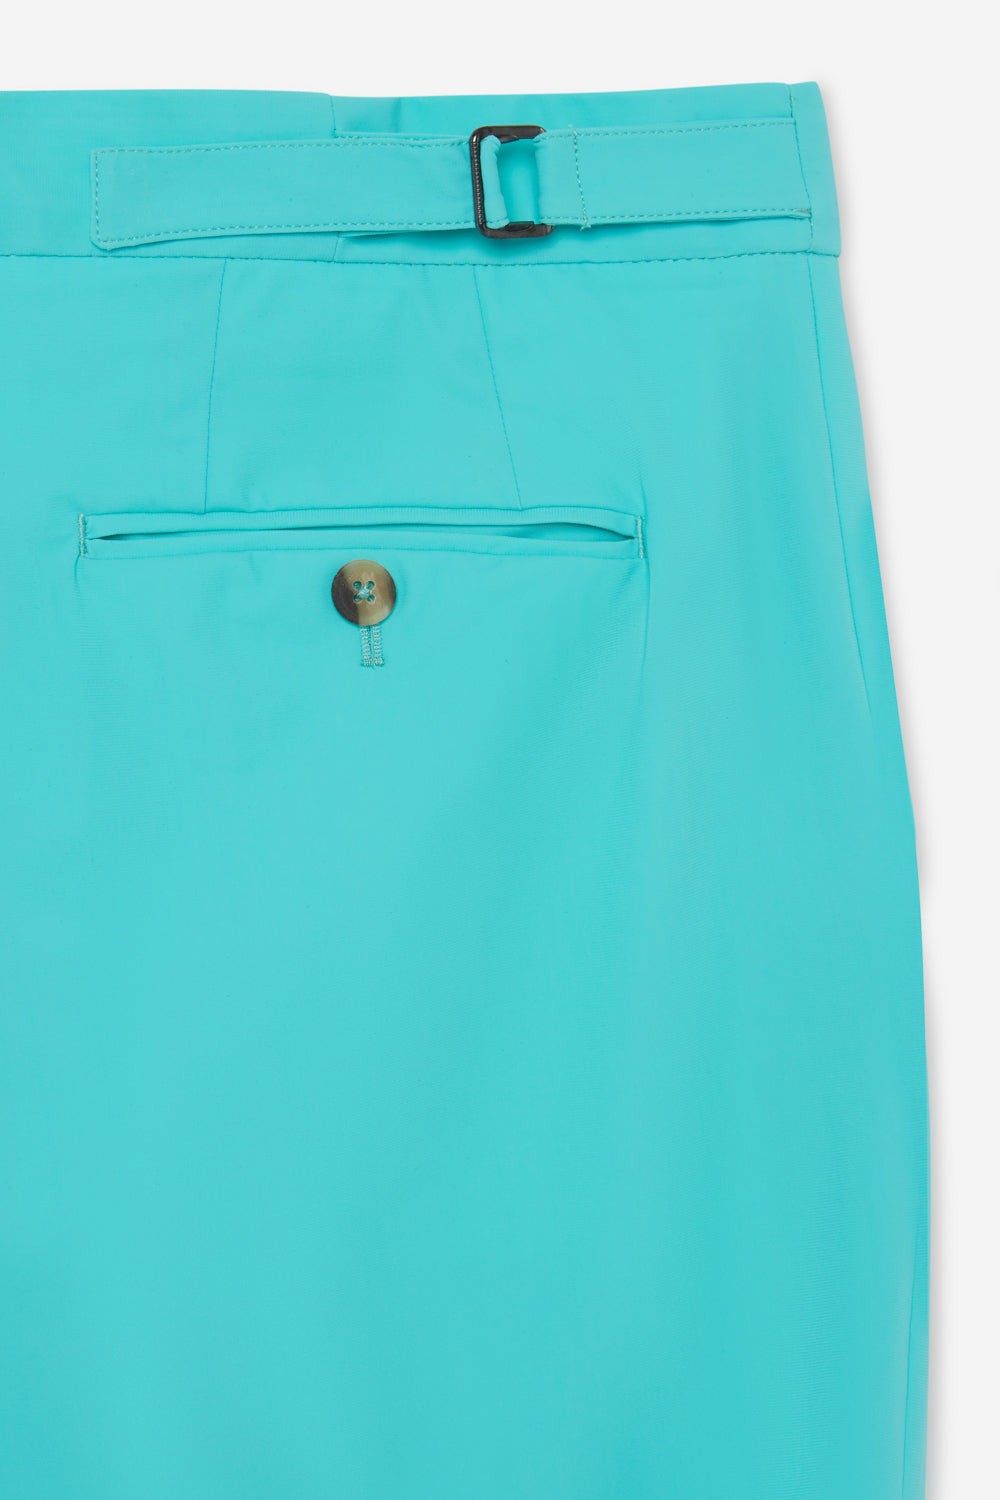 TURQUOISE LOSSI TROUSERS